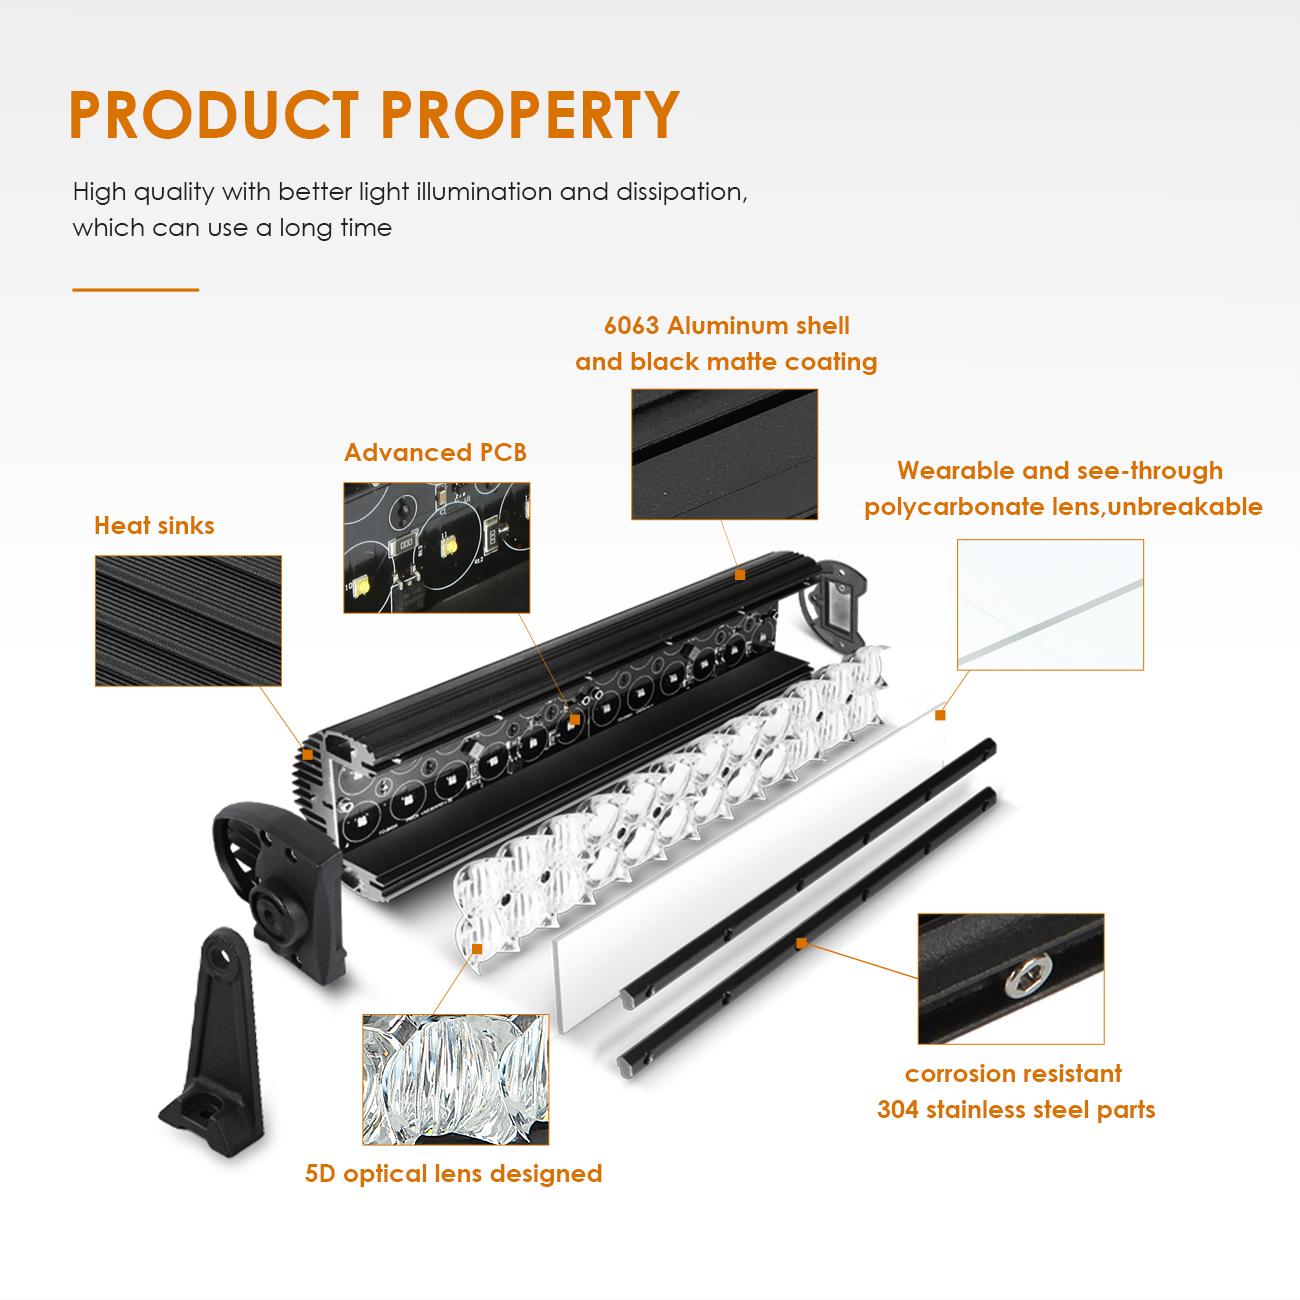 22" Curved CREE LED Light Bar 5D Lens 12000LM product breakdown